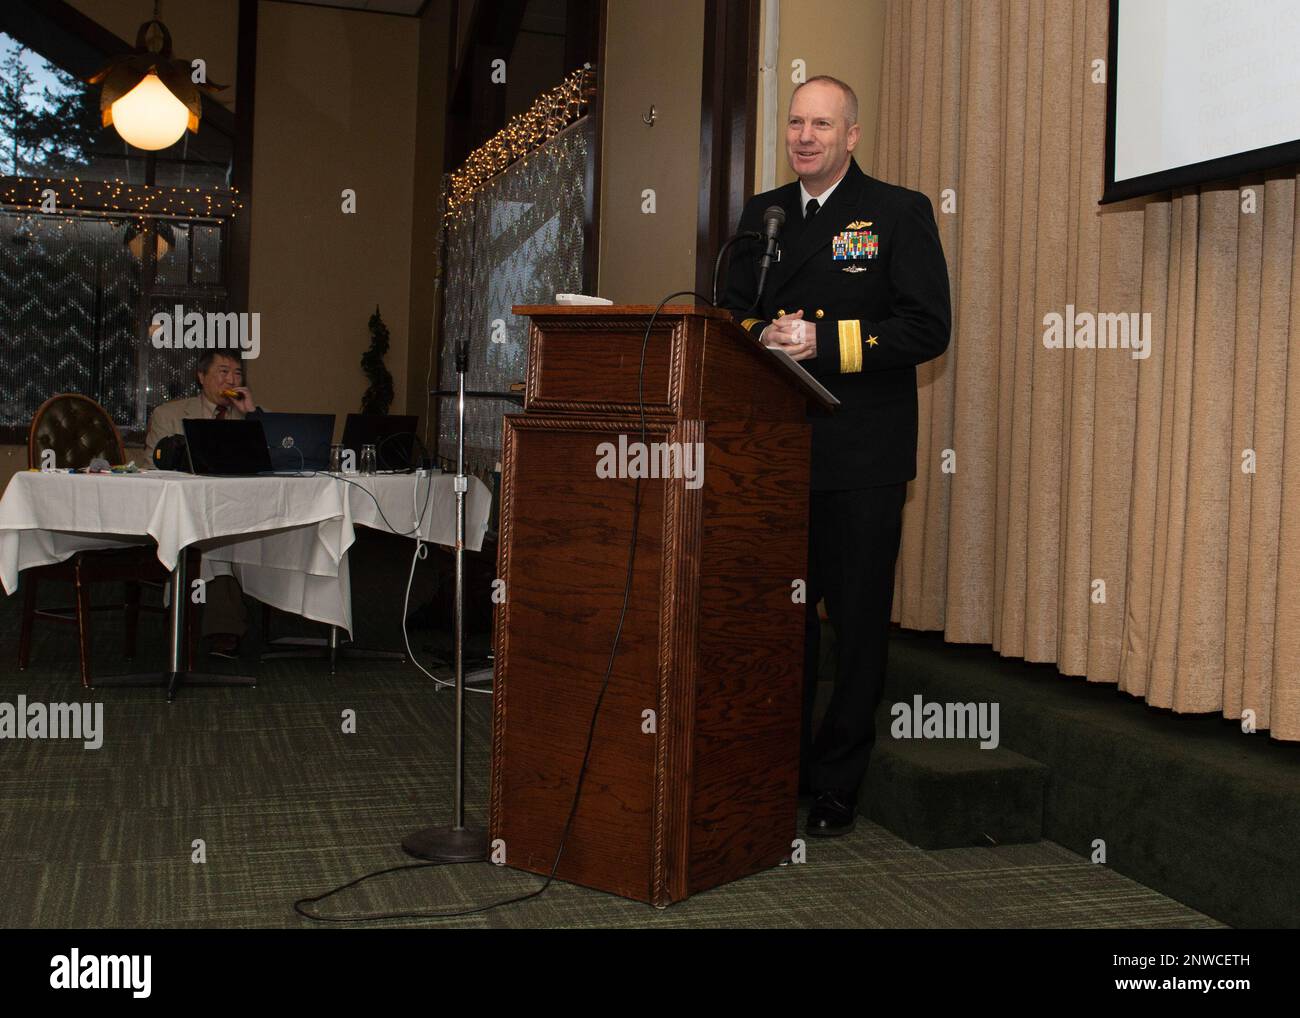 230218-N-ED185-1013  BREMERTON, Wash. (Feb. 18, 2023) Rear Adm. Mark Behning, commander, Submarine Group 9, speaks during the Junior Science and Humanities Symposium (JSHS) in Bremerton, Washington, February 18, 2023. The JSHS is a Department of Defense sponsored science, technology, engineering and mathematics (STEM) program that encourages high school students to conduct original research in the fields of STEM. Stock Photo